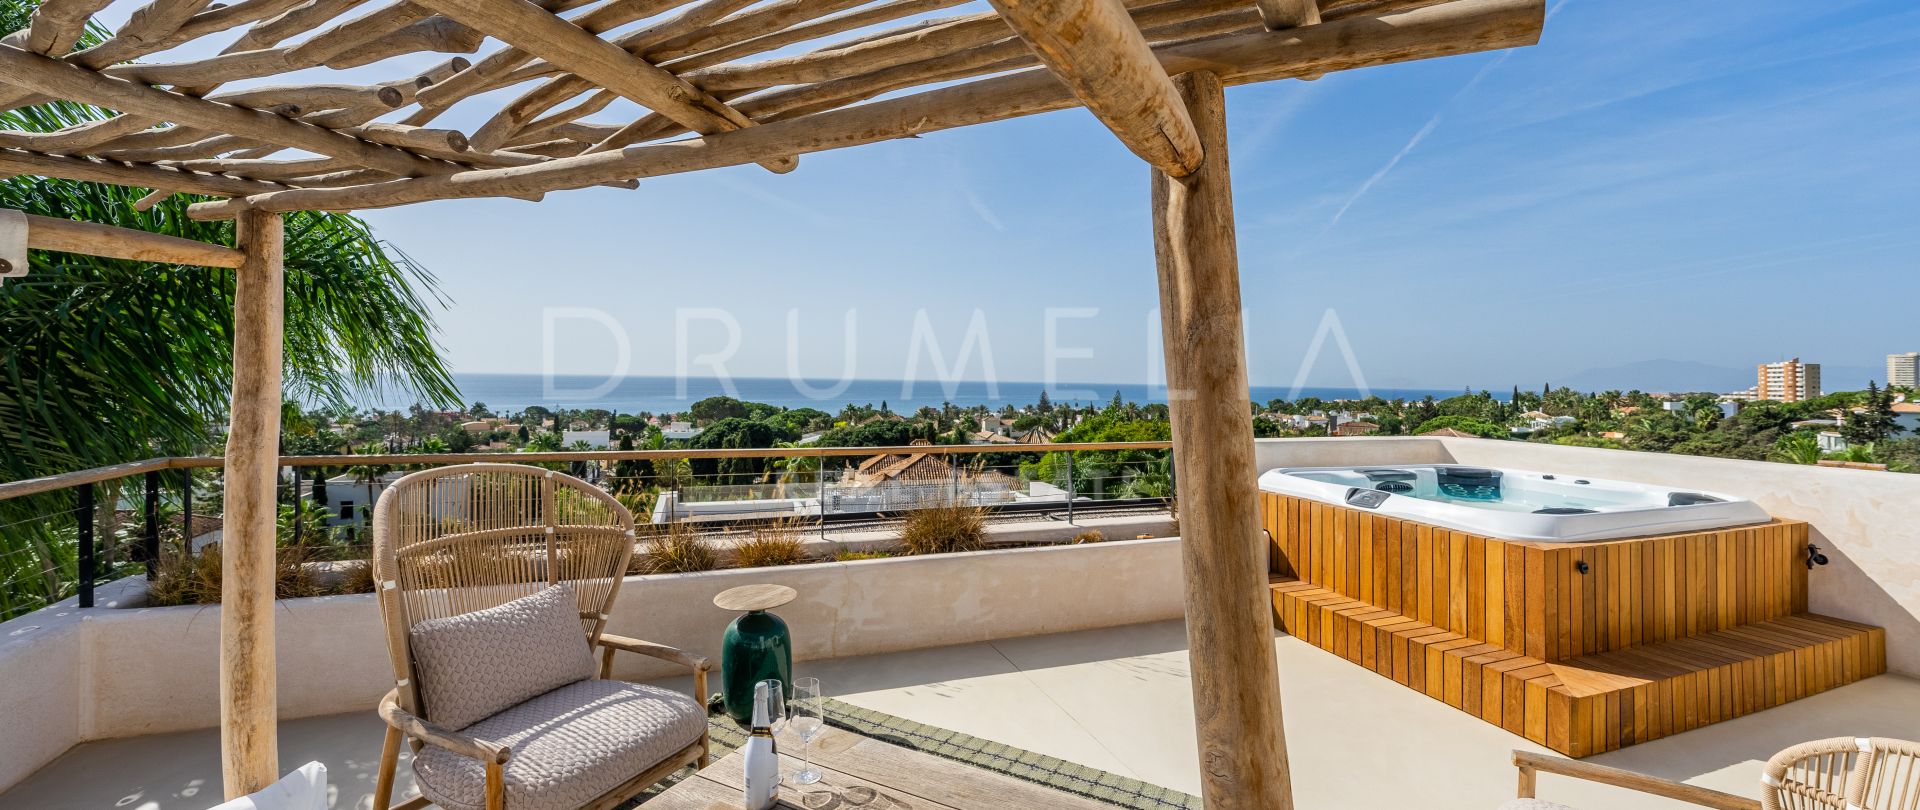 Charming villa with an exotic resort-like ambiance and stunning sea views in Marbesa